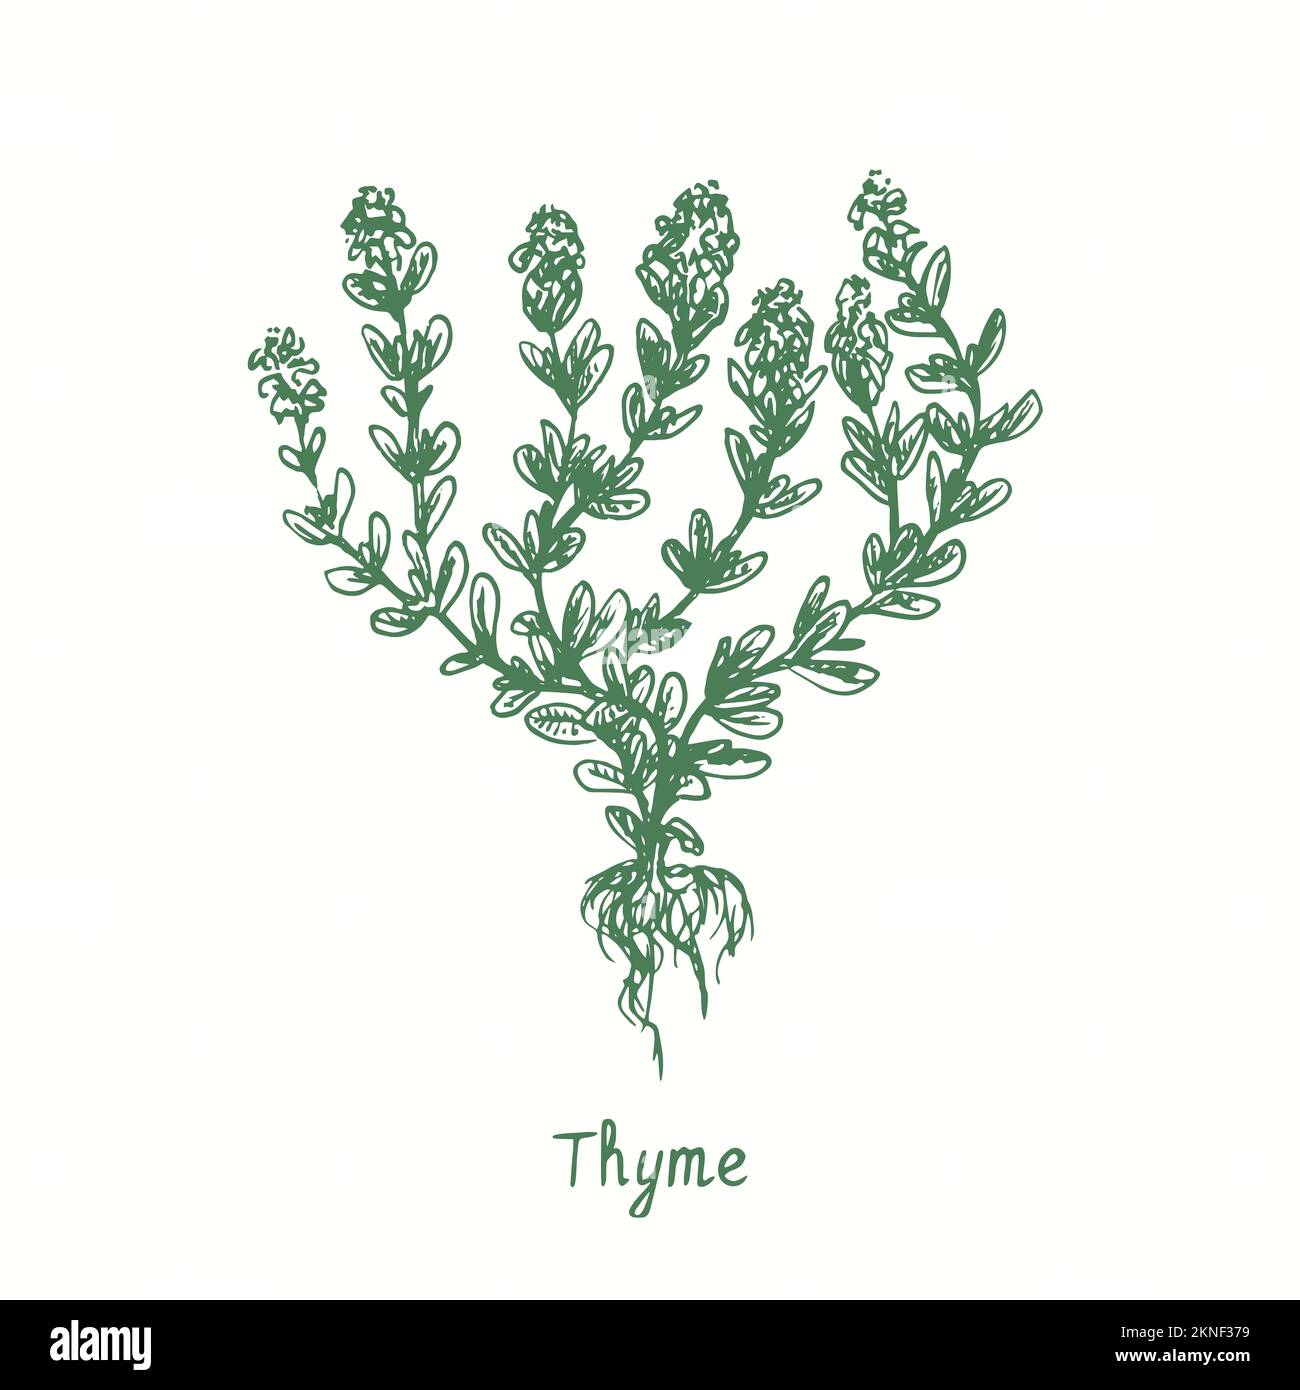 Thyme green twig.  Ink black and white doodle drawing in woodcut style Stock Photo